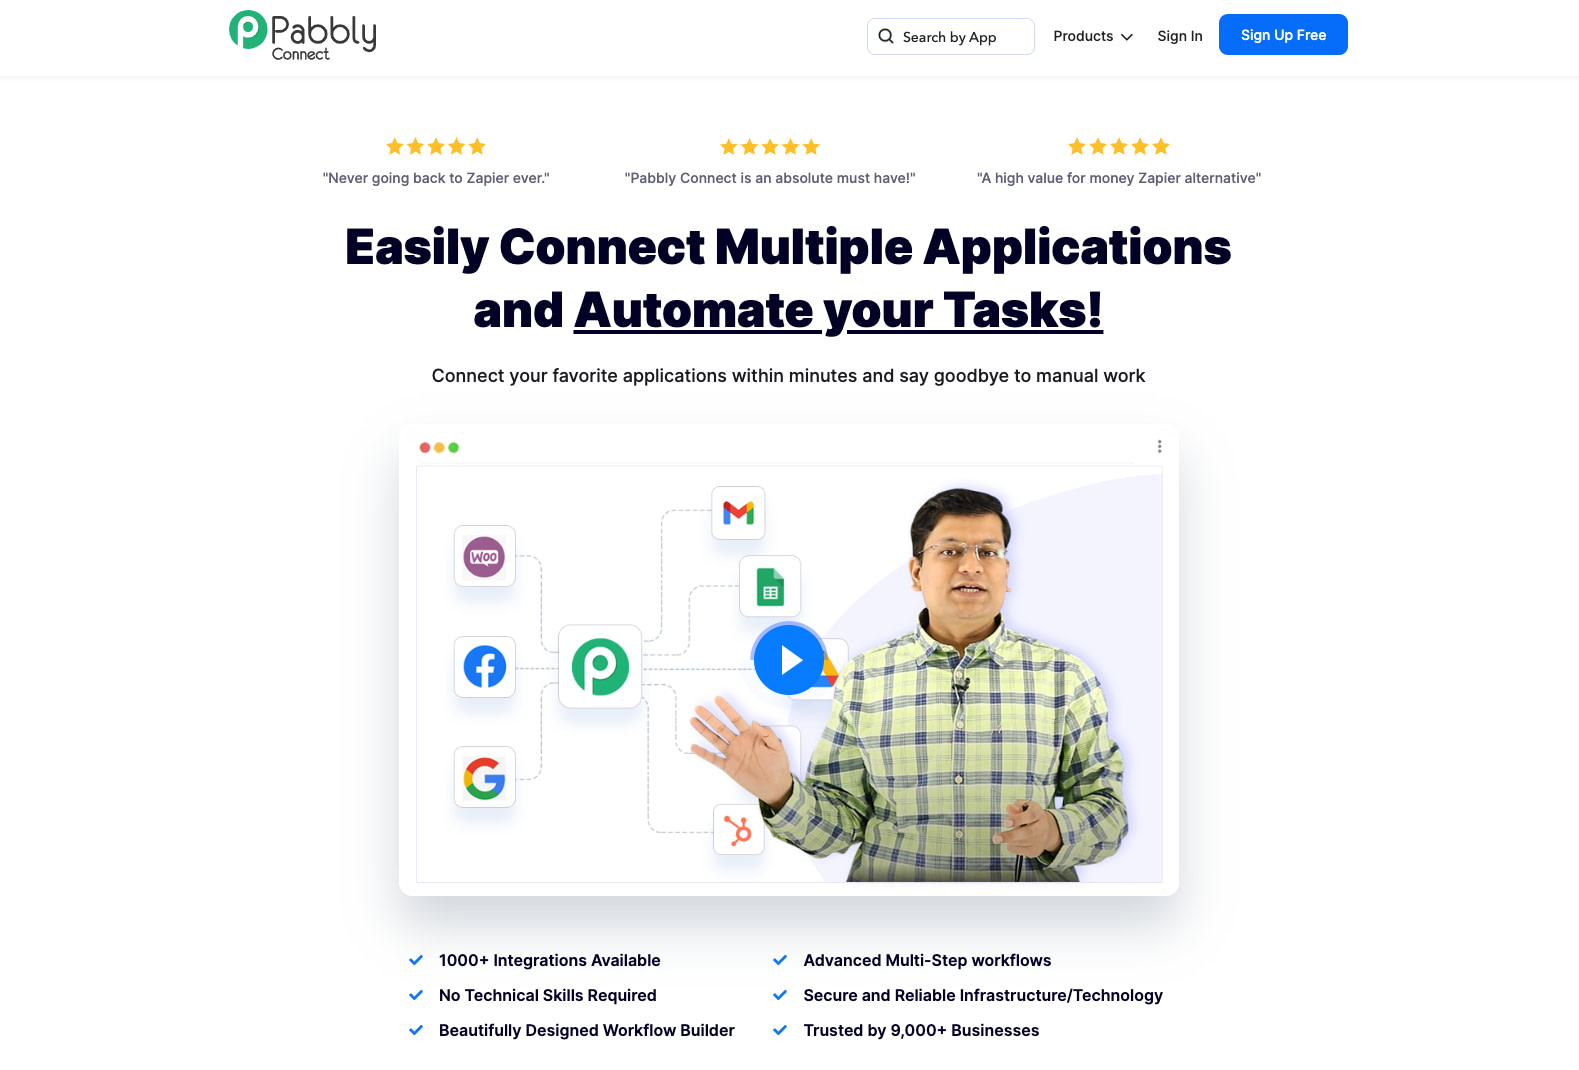 Typebot Integrations FREE - Connect with 1000+ Apps